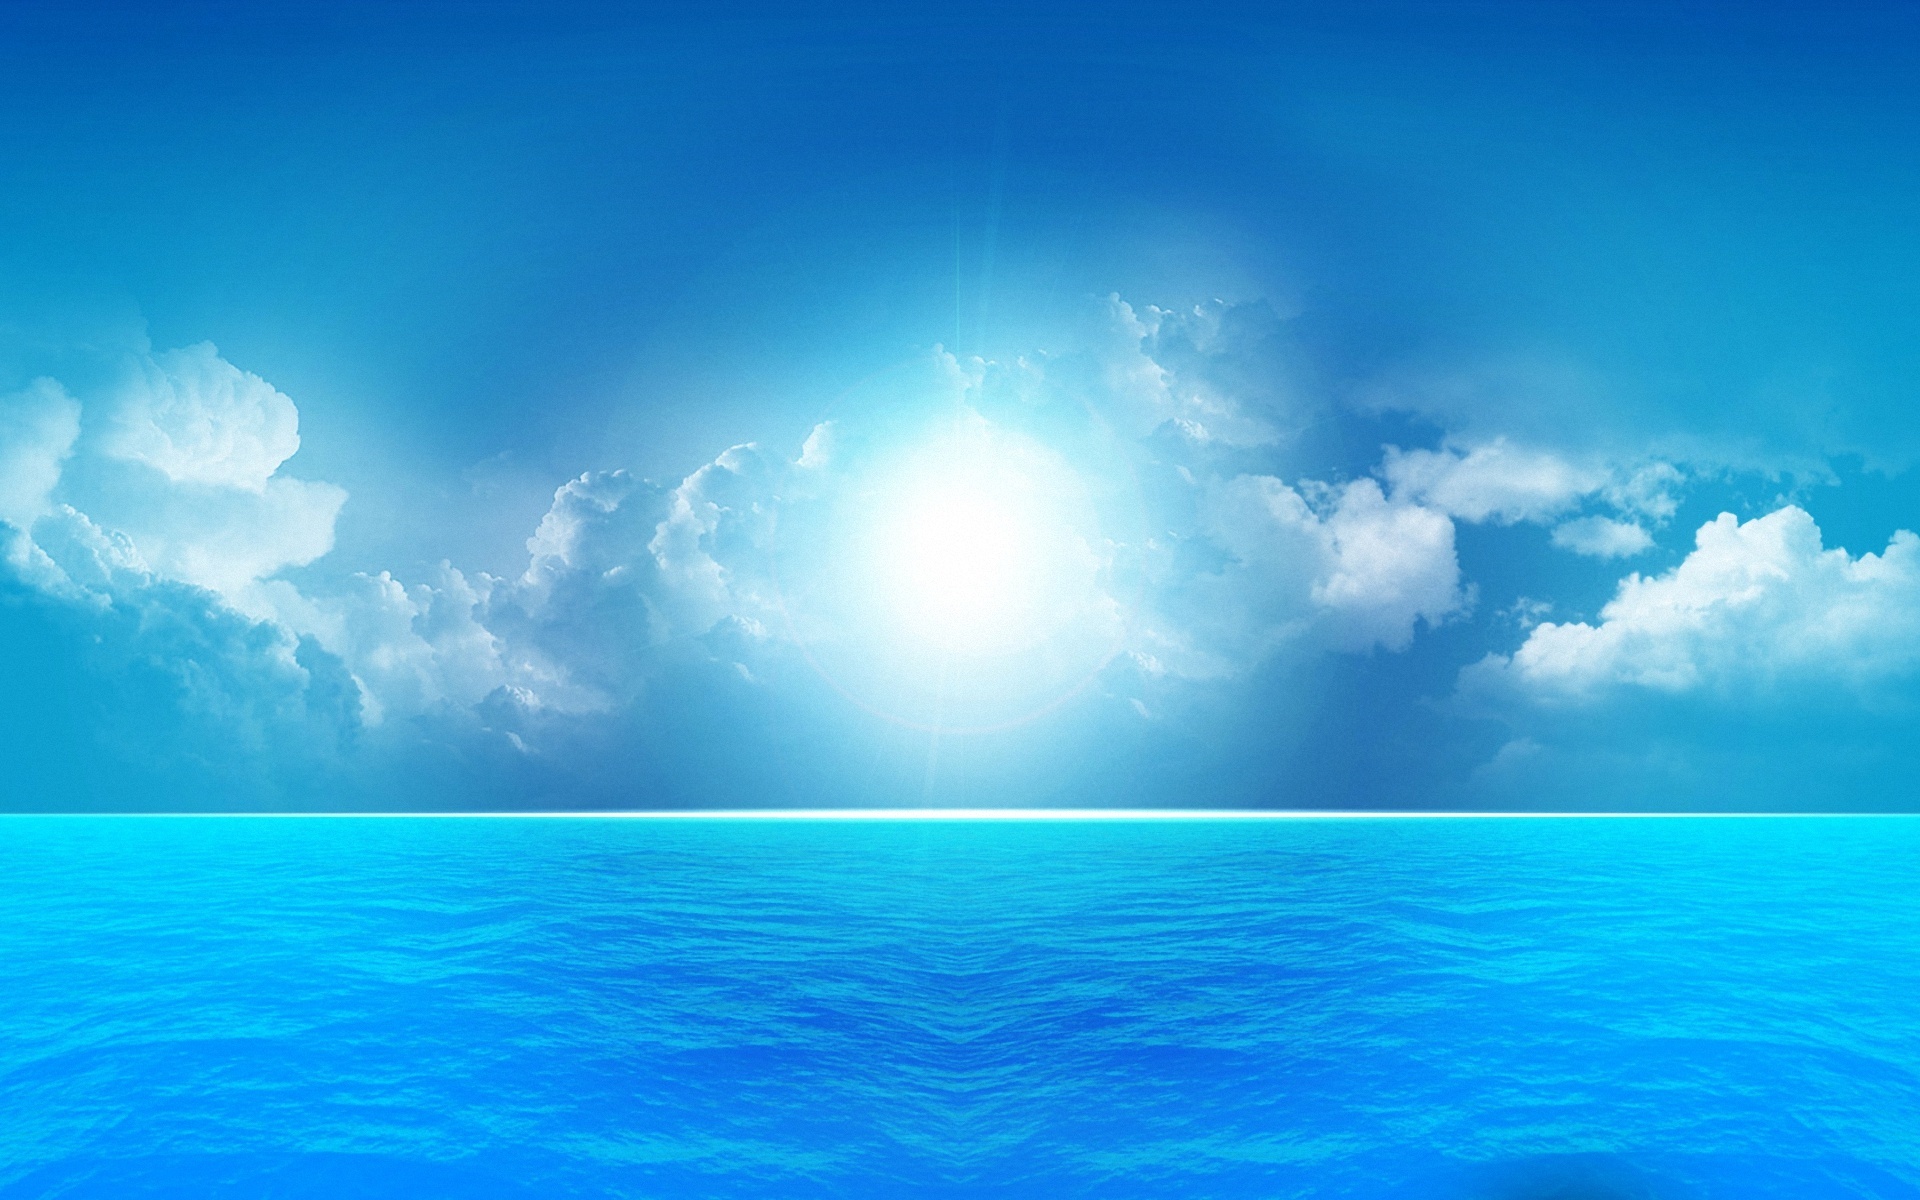  Summer 2012   a blue day at sea Wallpapers   HD Wallpapers 97004